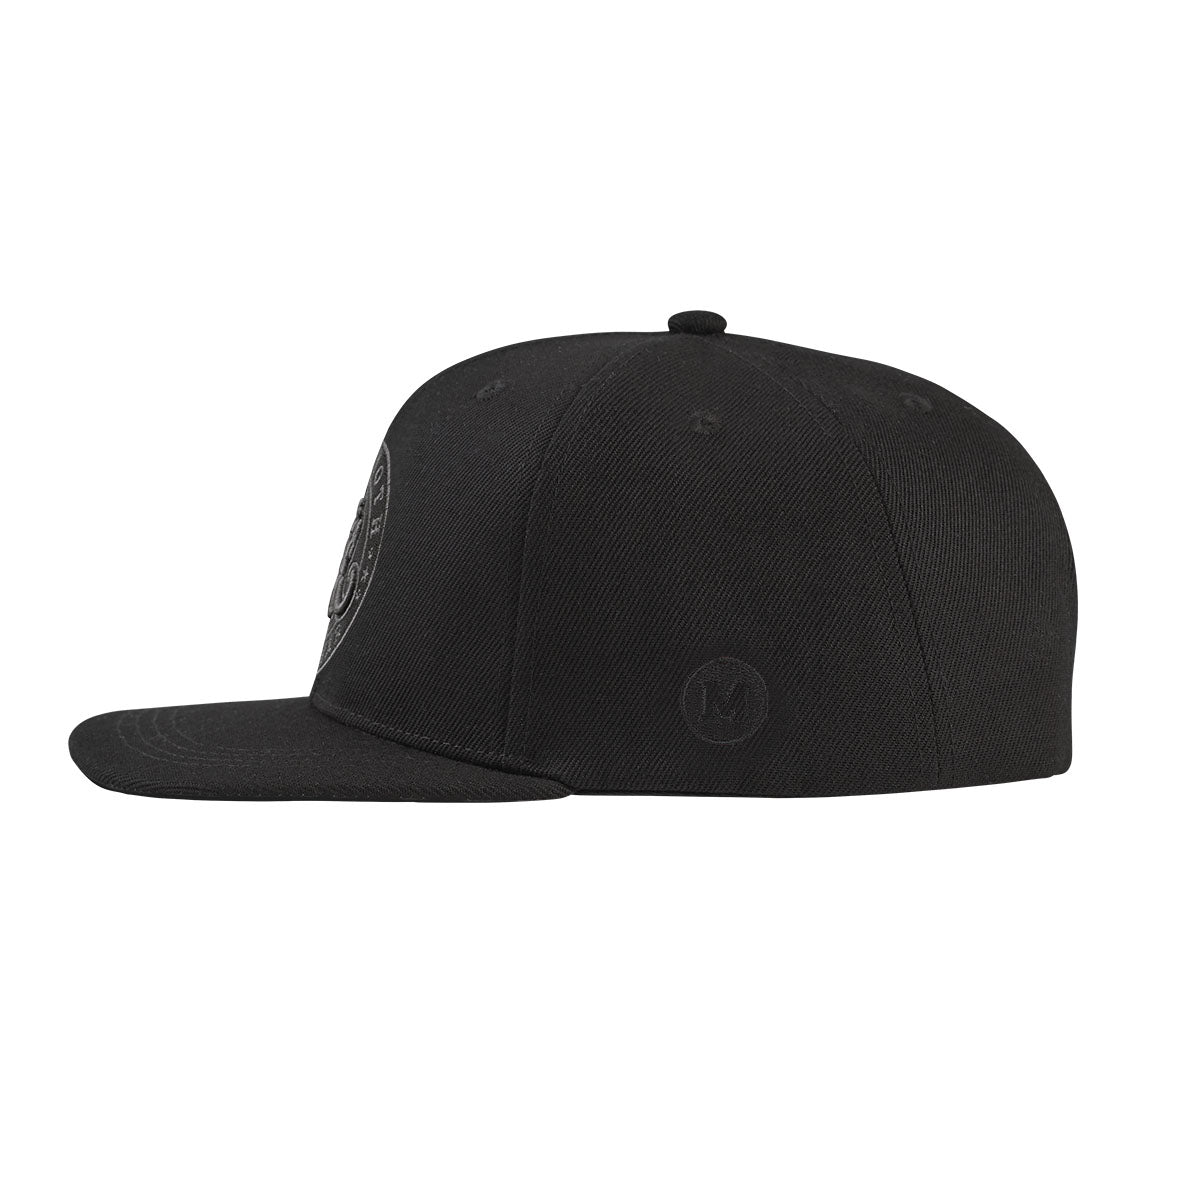 Classic Blacked Out Snapback Hat - Order Now - Mammoth Headwear